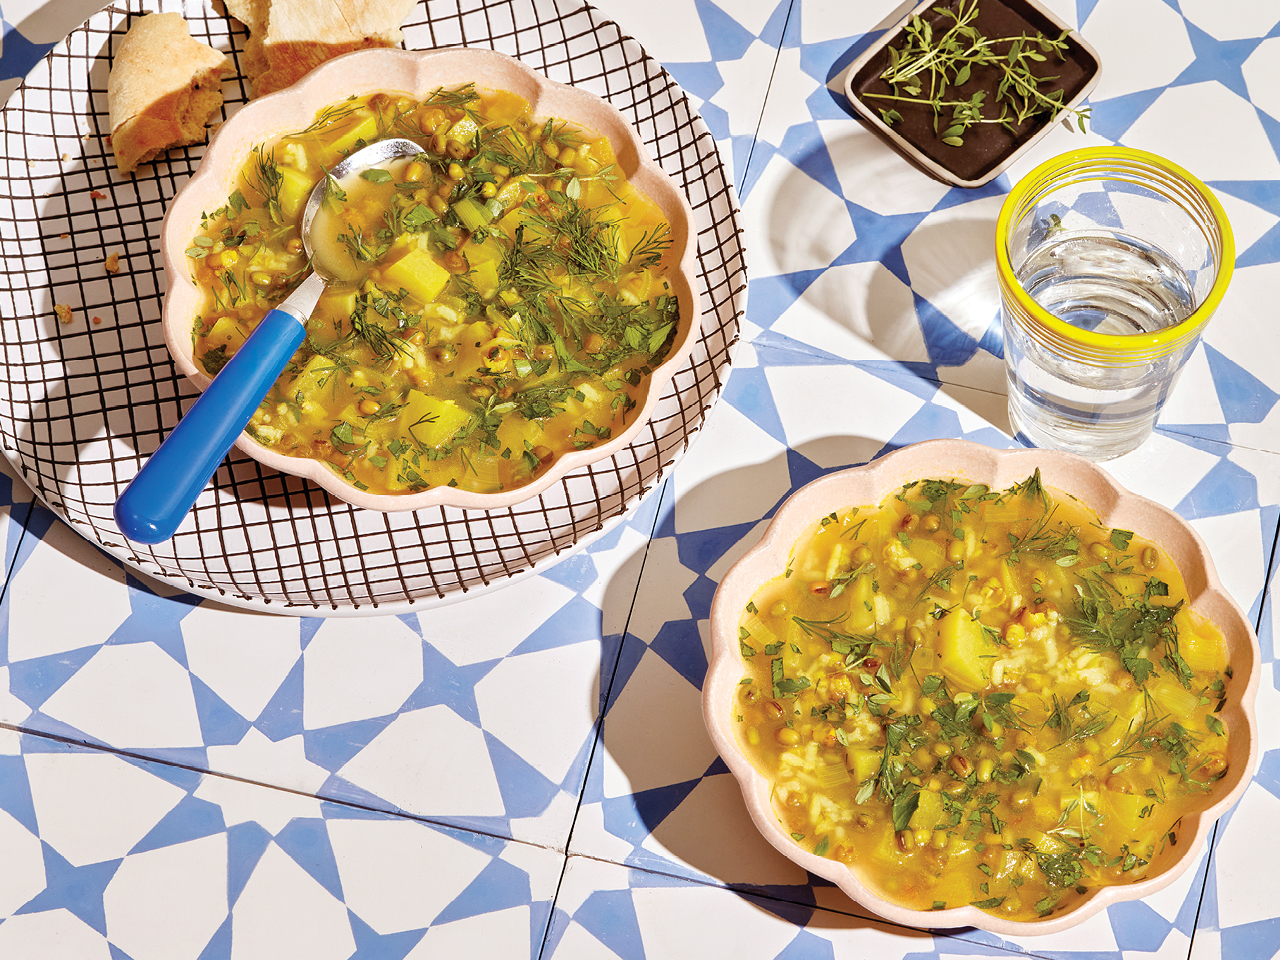 Two bowls of Persian-style mung bean soup served on a printed tile counter